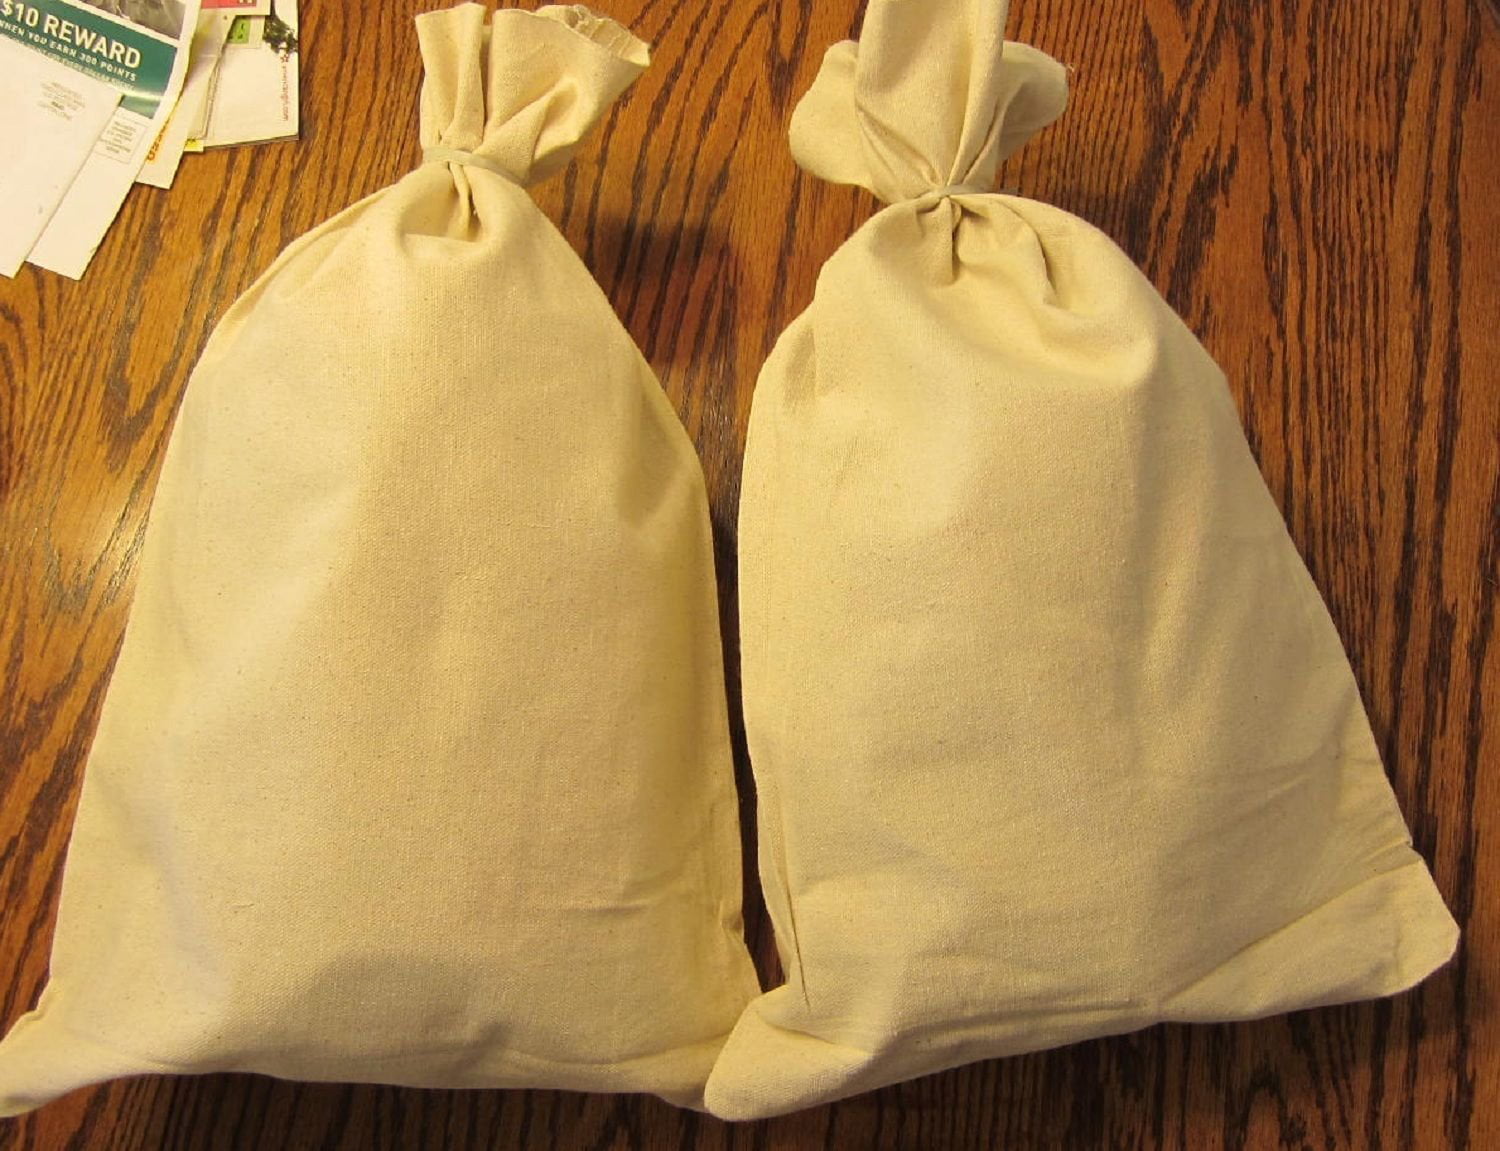 8 DUCK CANVAS COIN BANK DEPOSIT BAGS WITH SEWN-ON TIES 12" BY 19" MONEY SACK BAG 